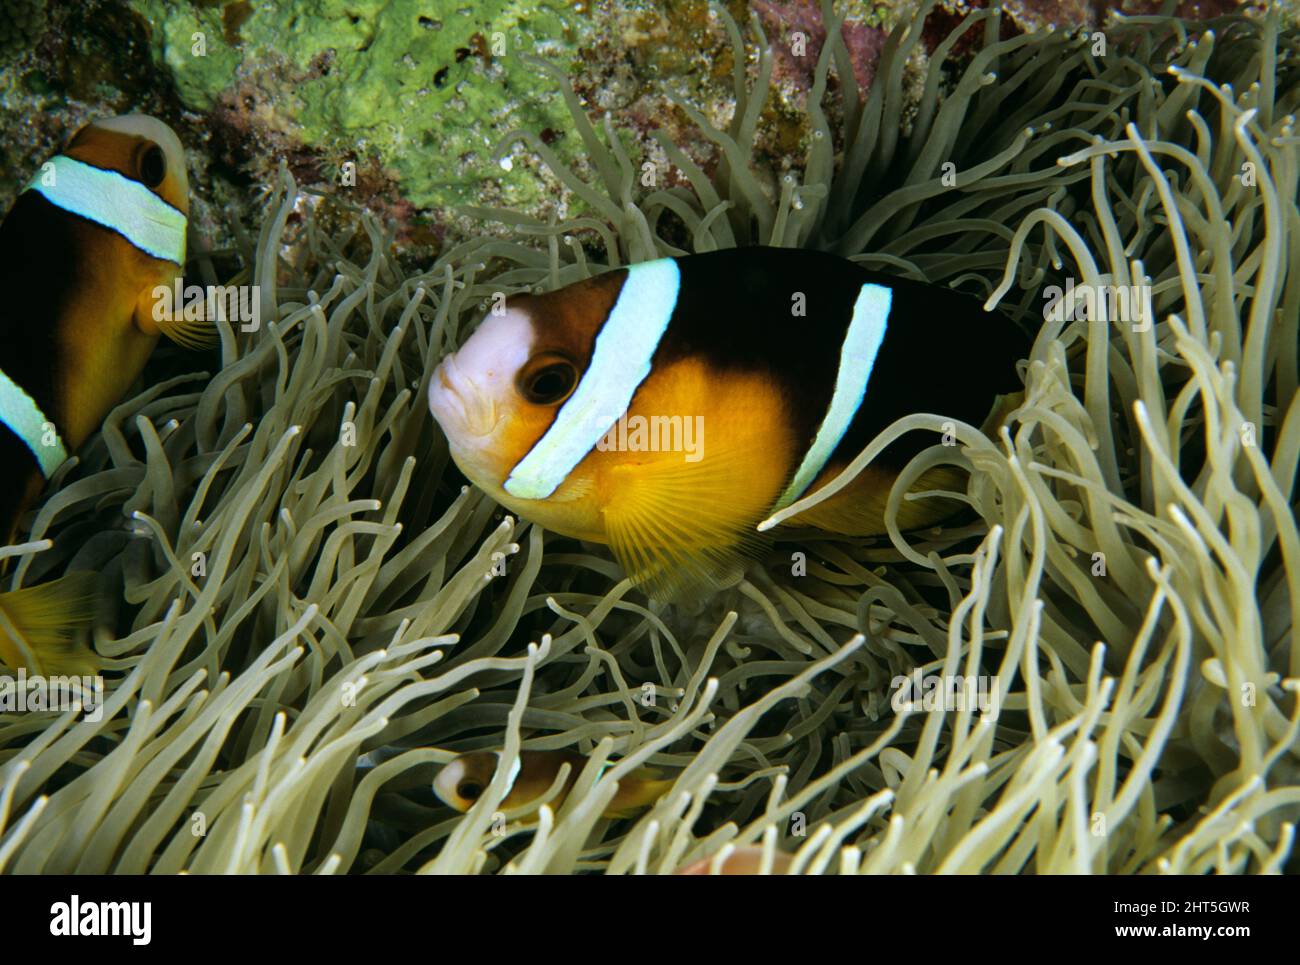 Clark’s anemonefish (Amphiprion clarkii), dwell within anemone tentacles, immune to their stinging cells. Western Australia Stock Photo